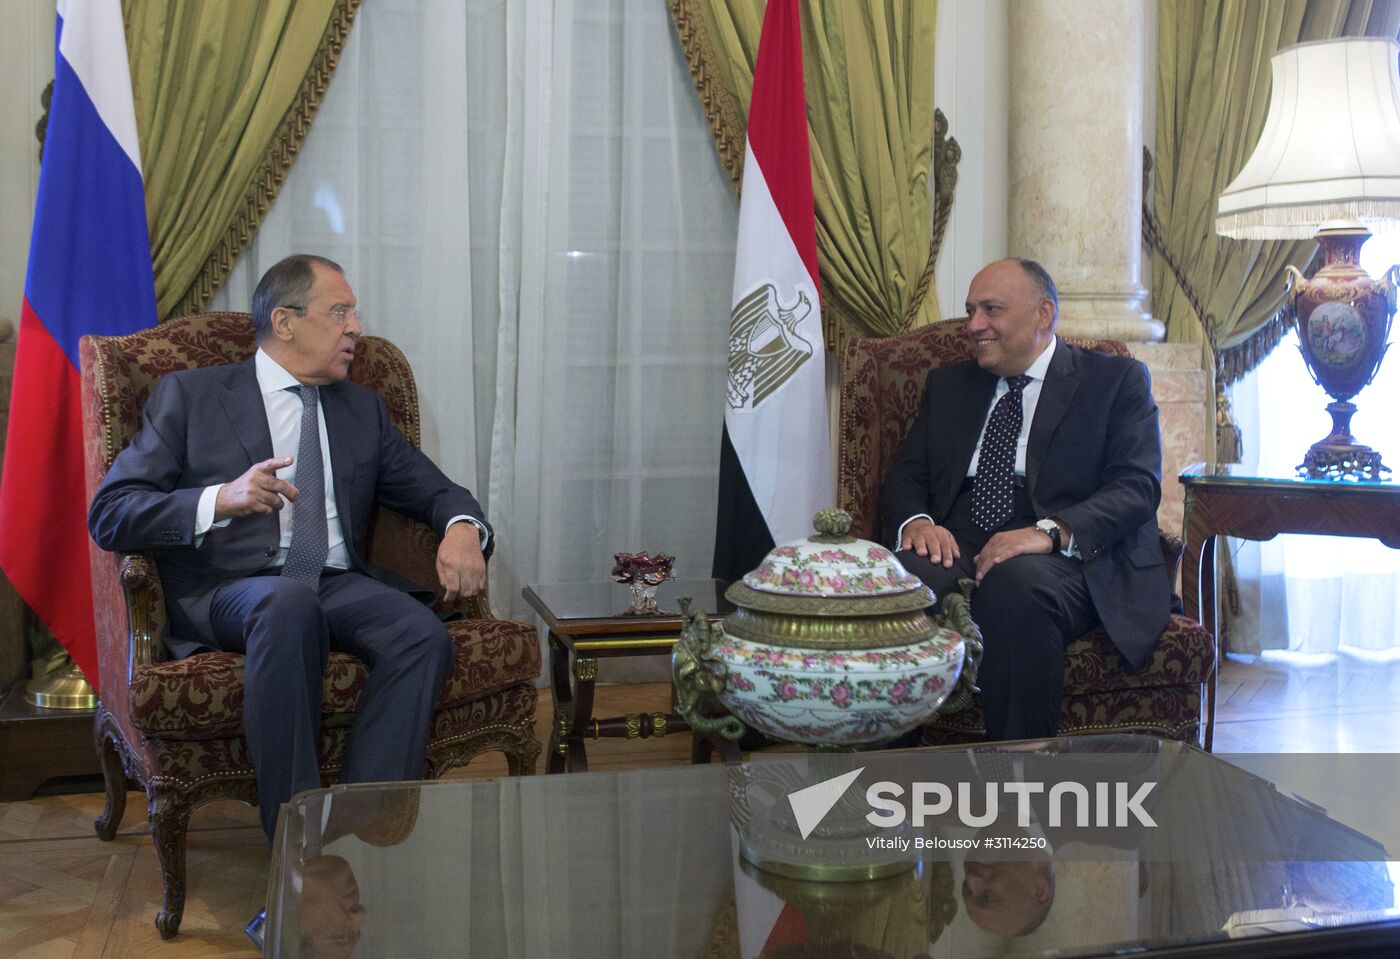 Russian Foreign Minister Lavrov, Defense Minister Shoigu visit Cairo